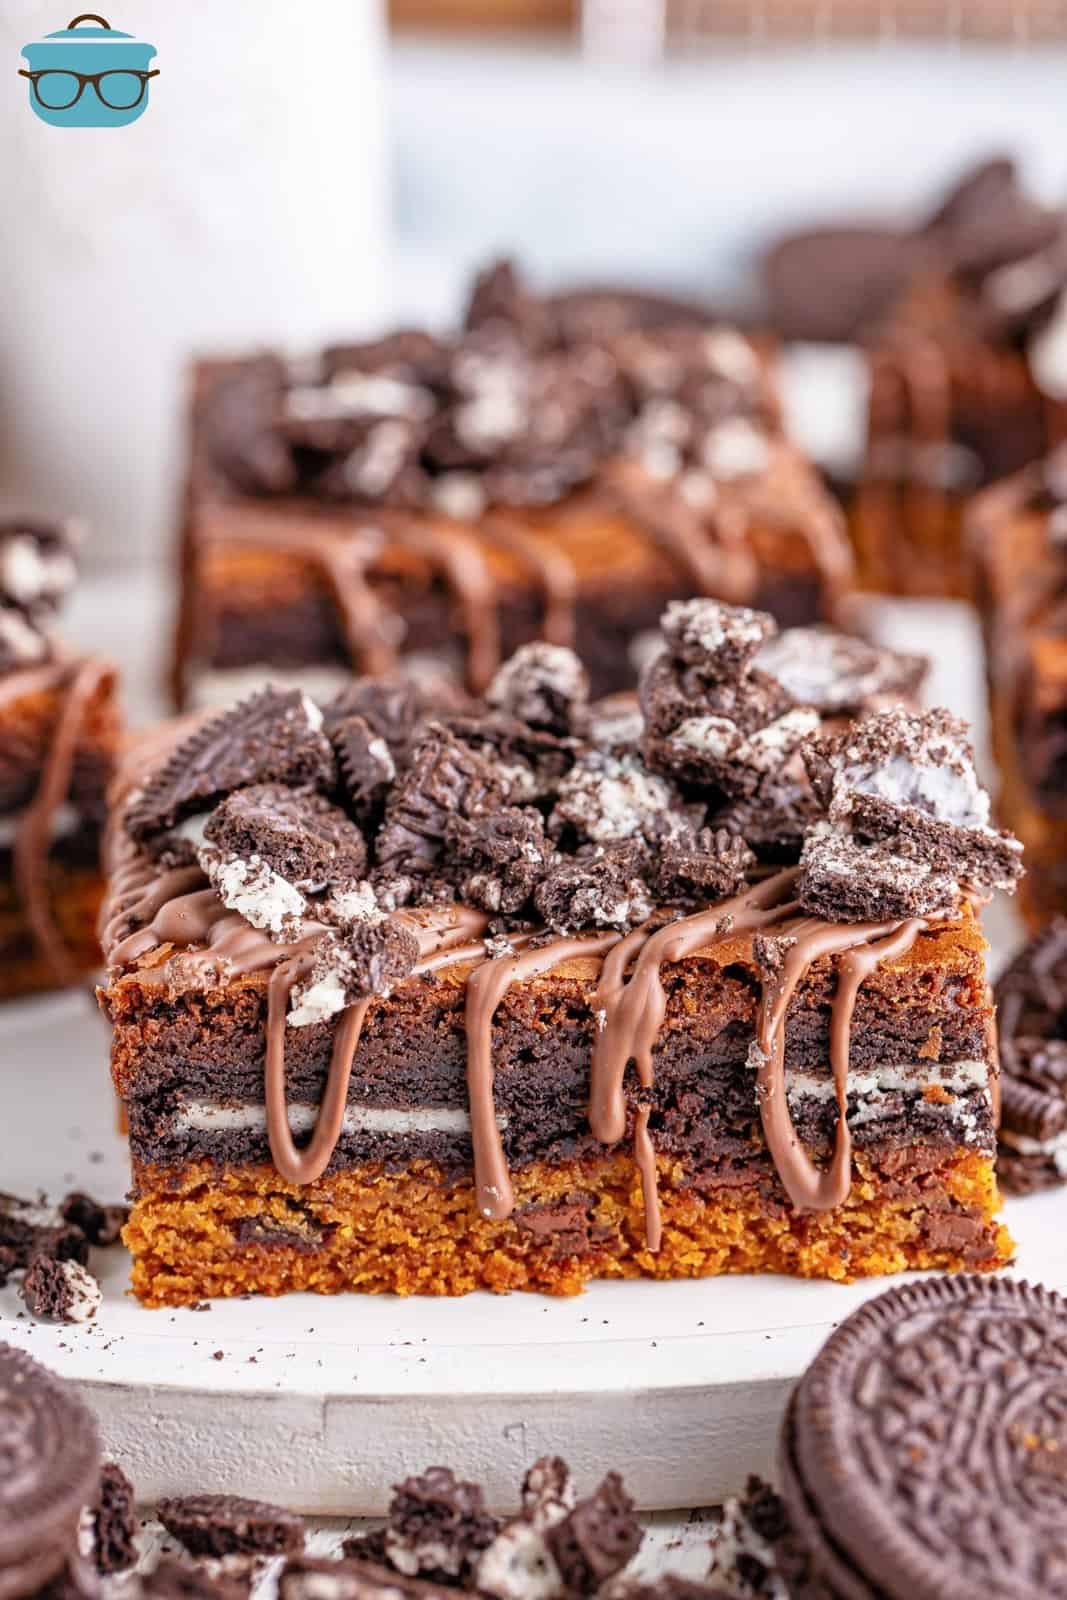 A few Oreo Brookie Bars with chocolate drizzle on top.